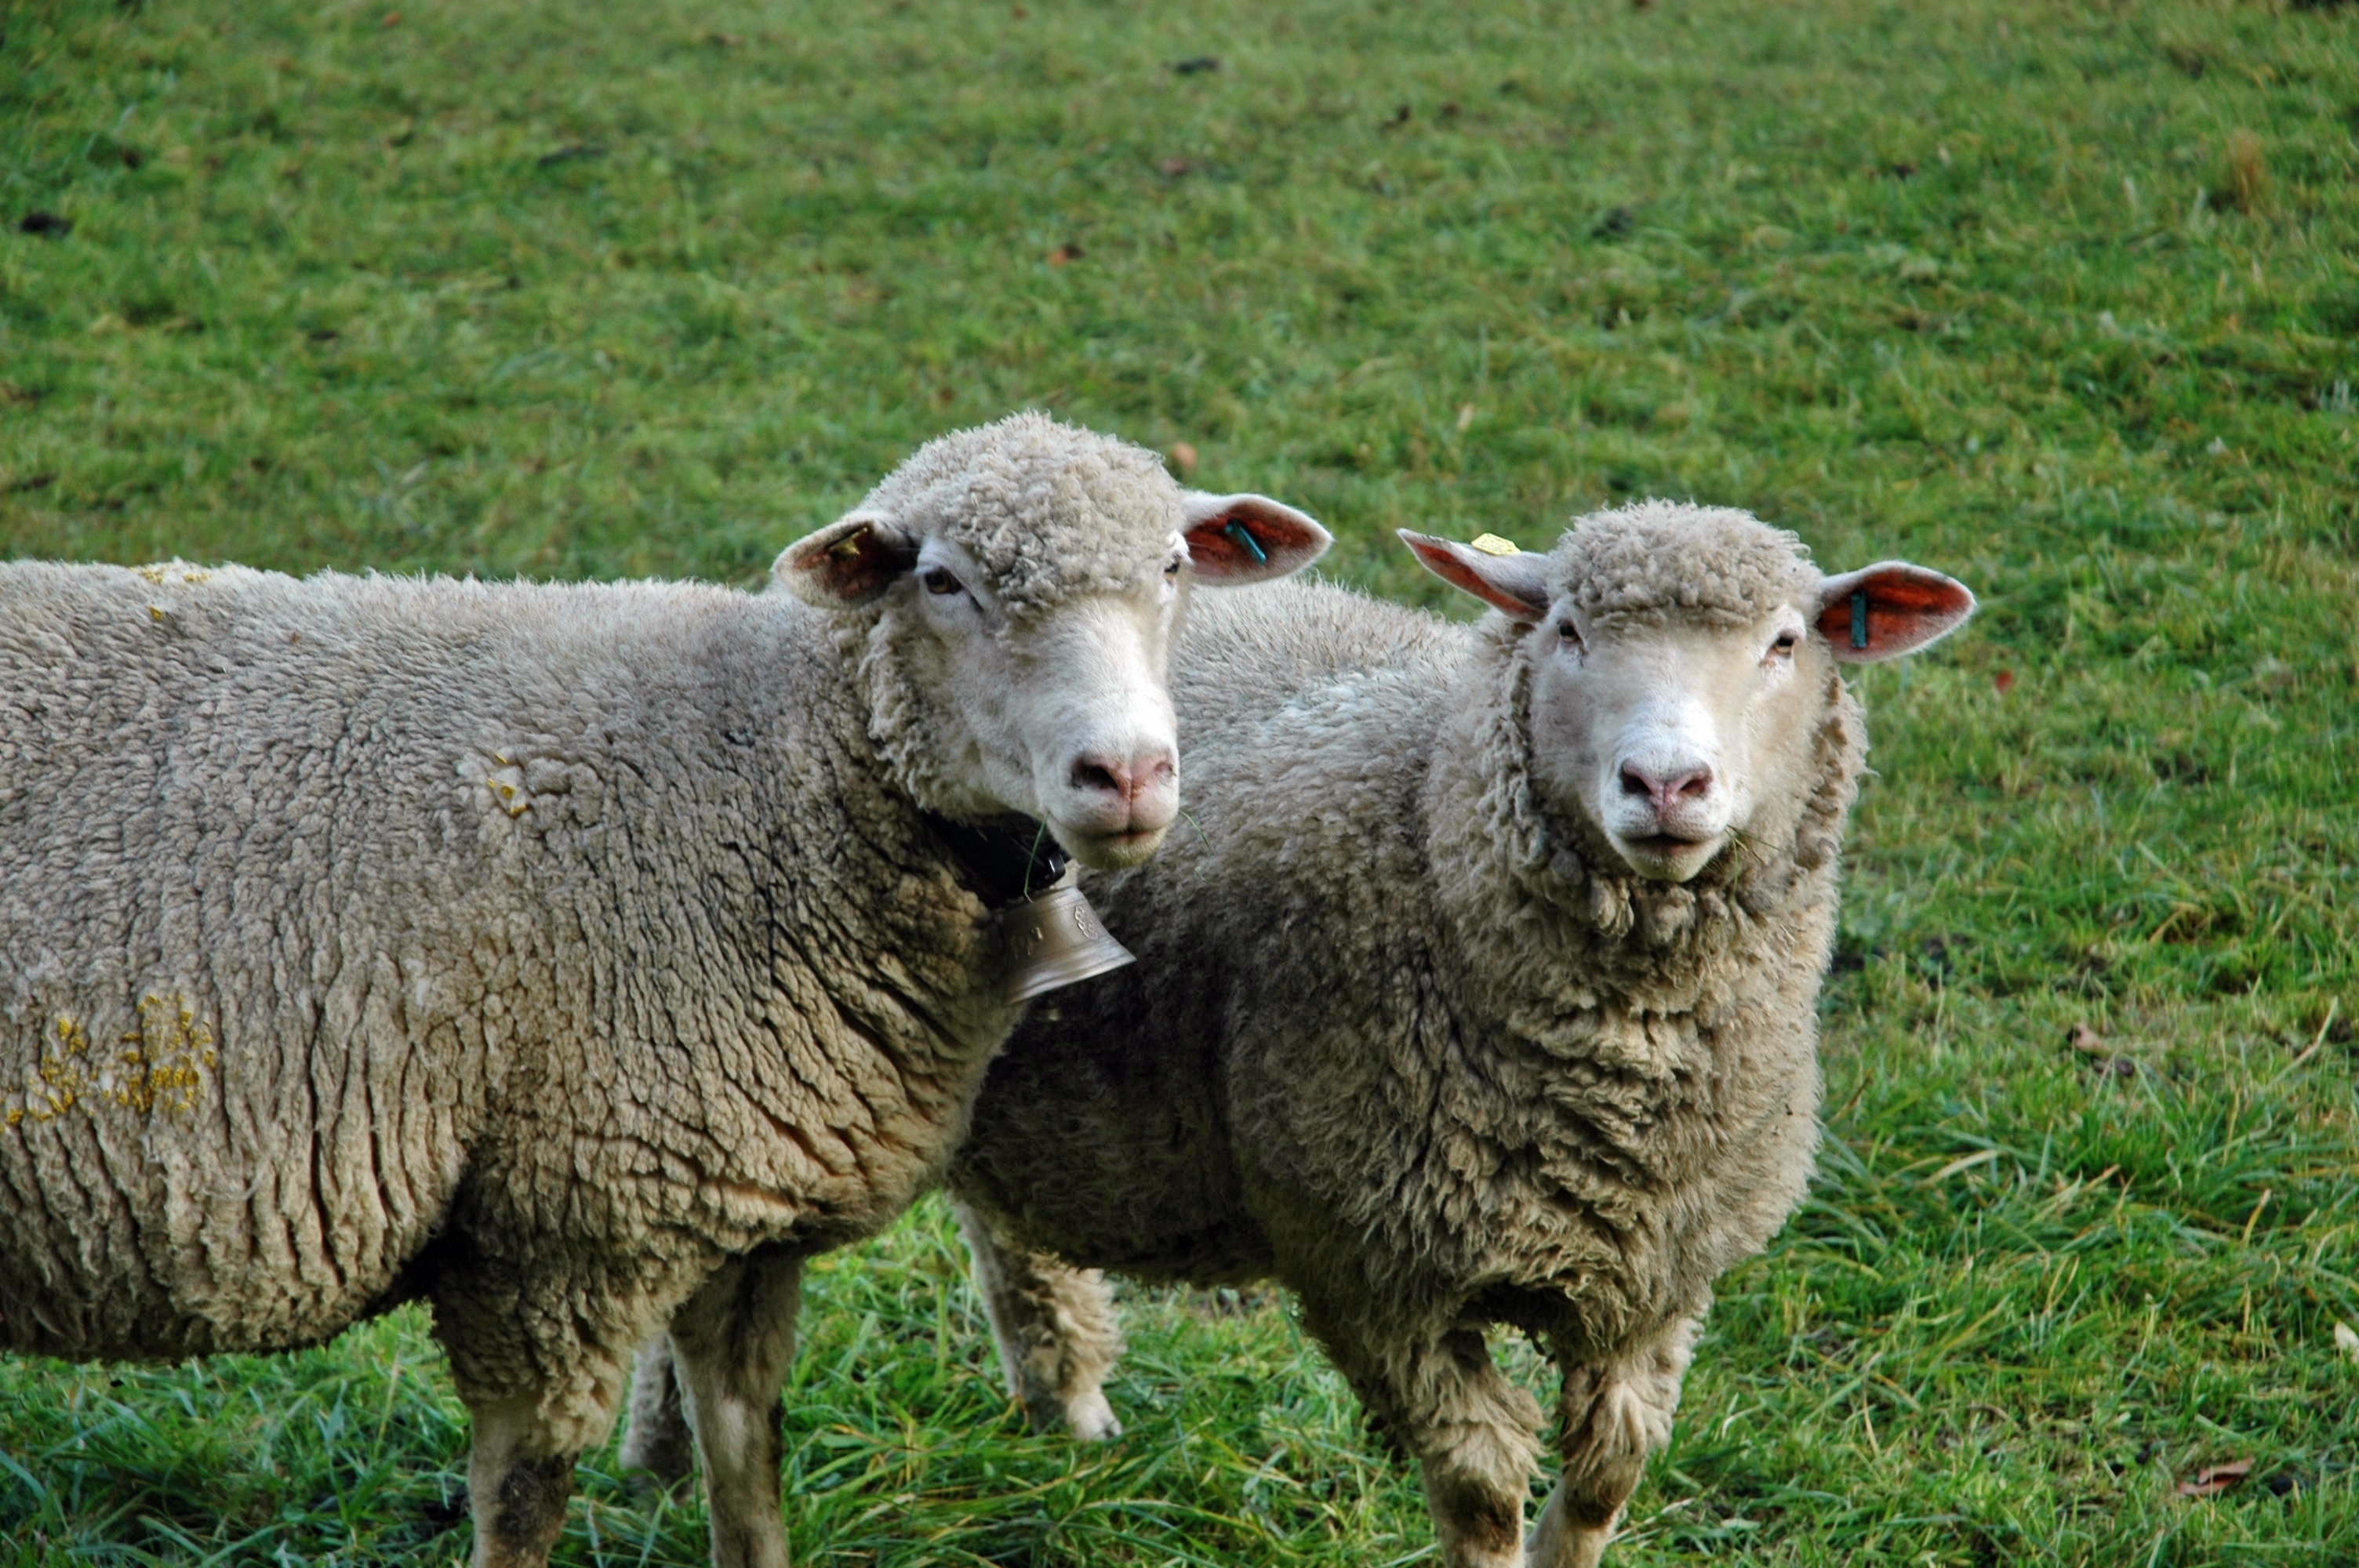 two grey and white sheep on the green grass field